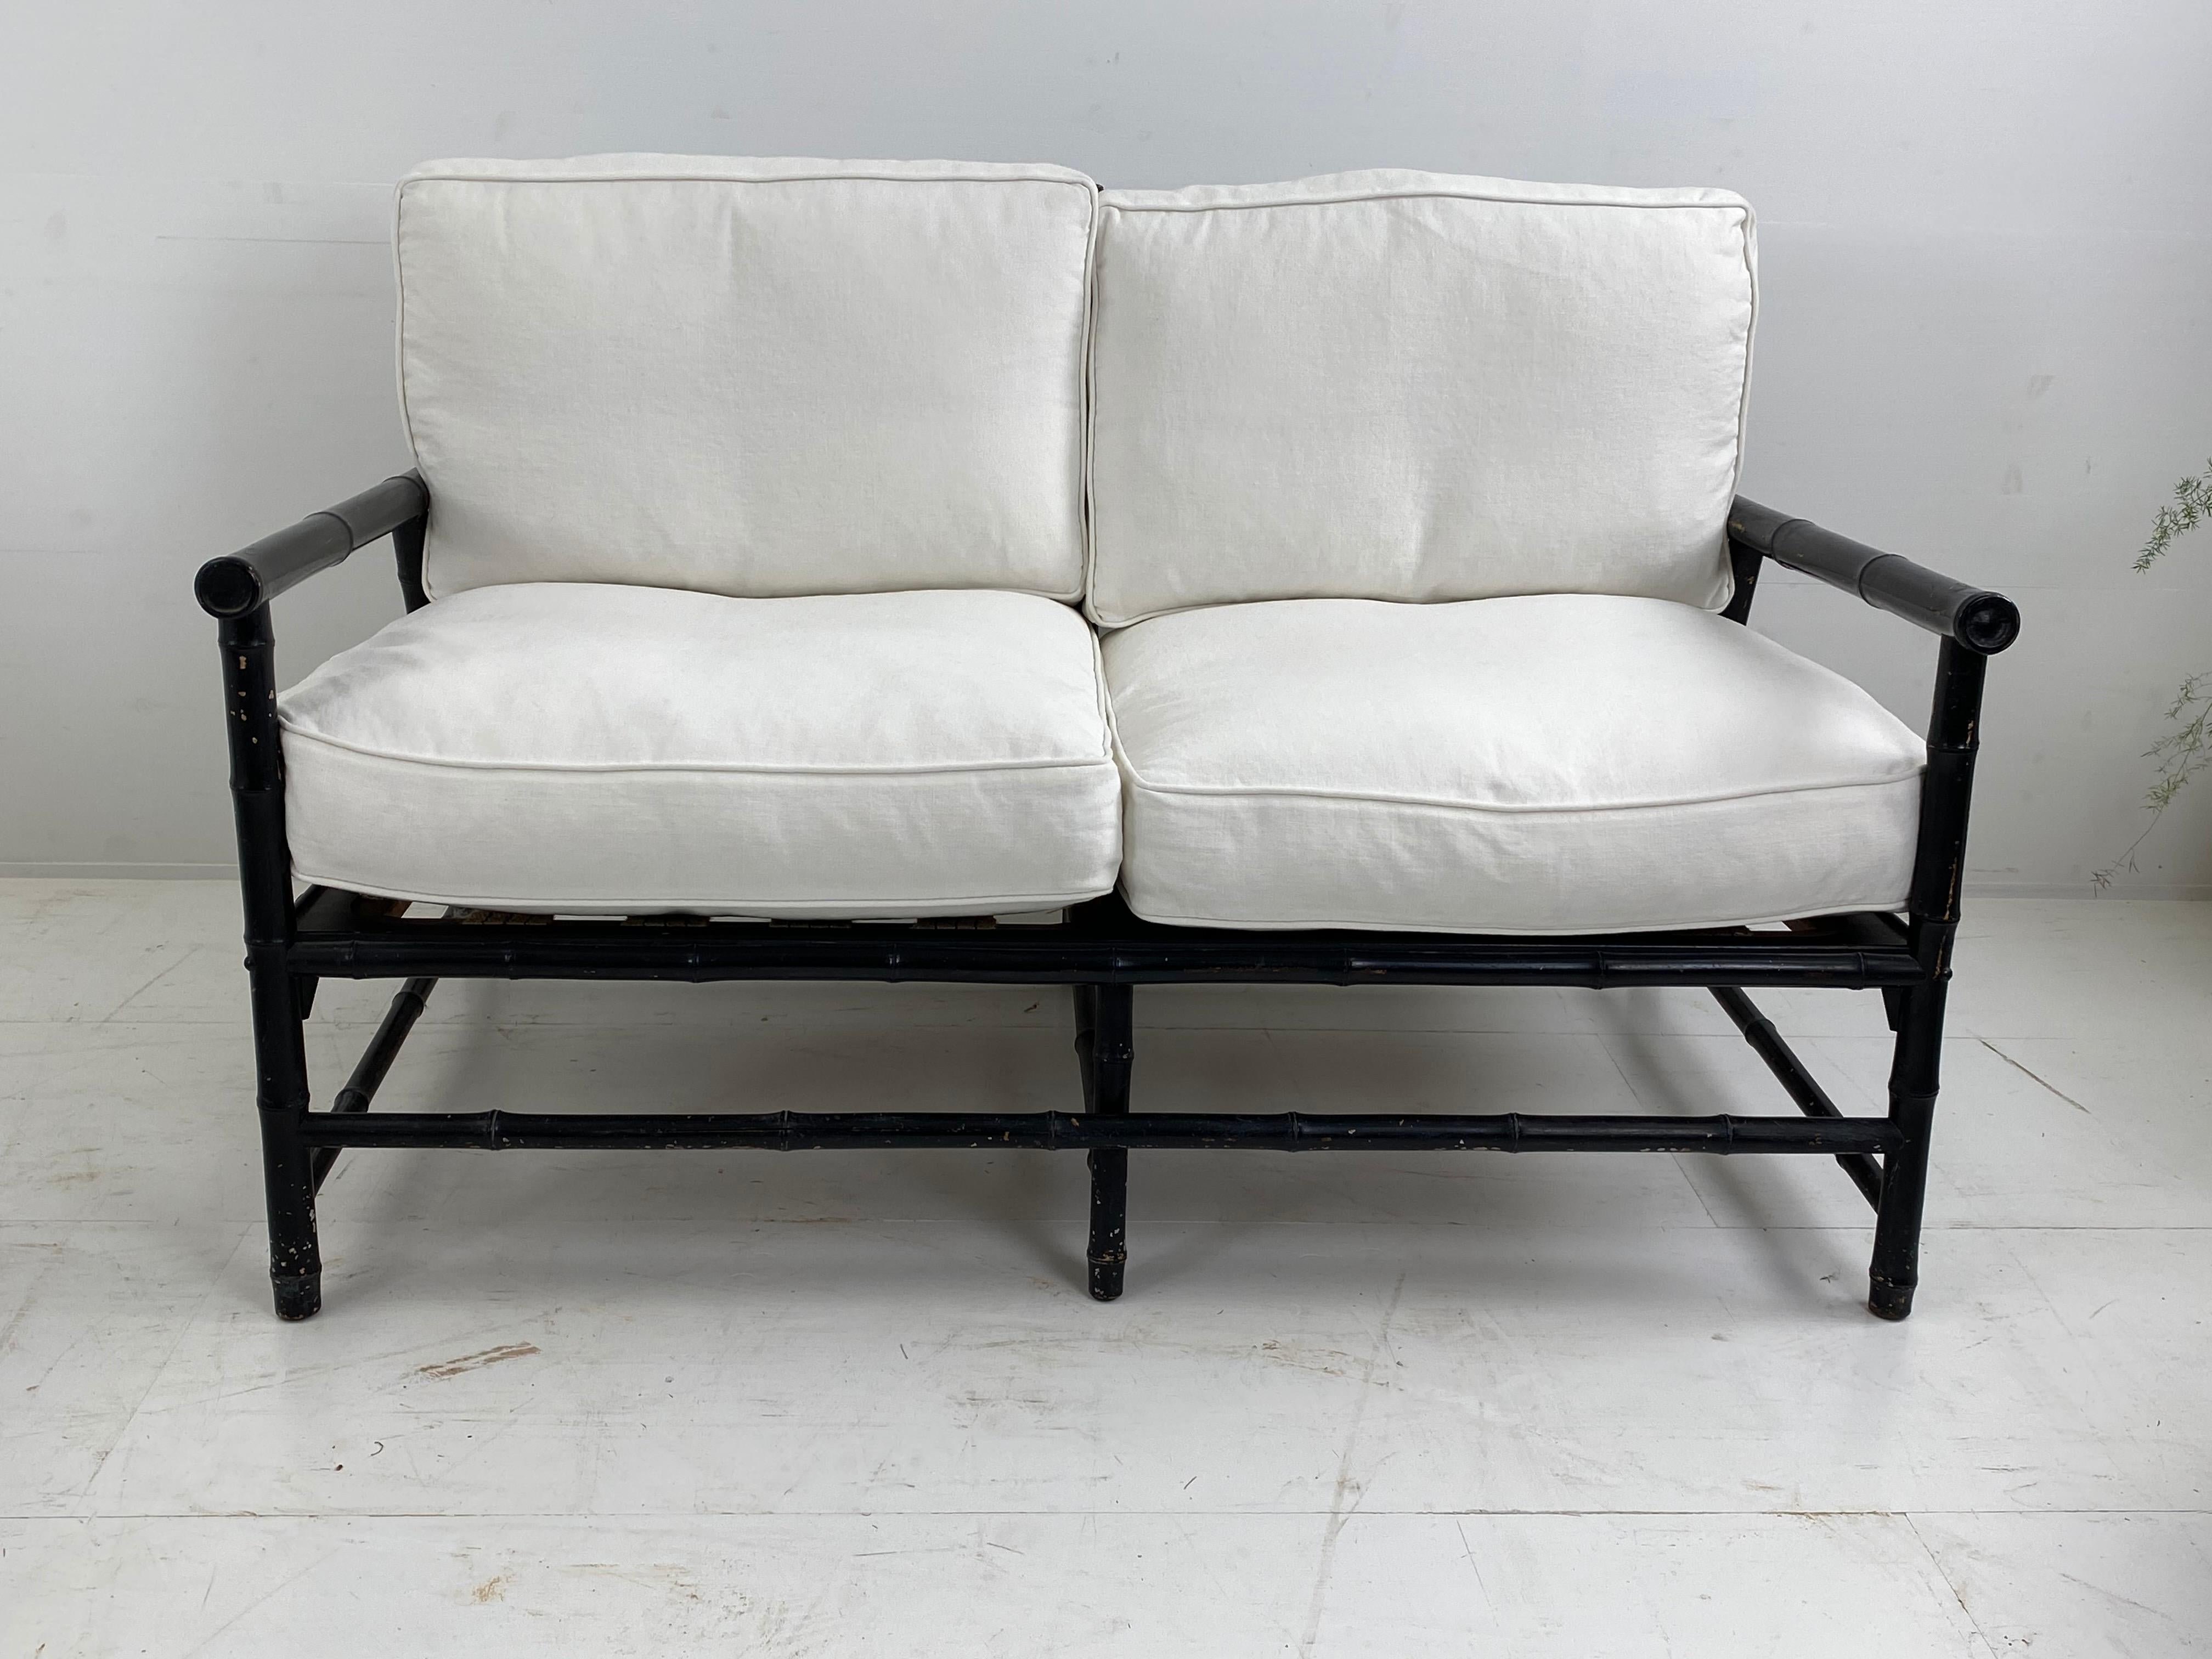 Pair of Vintage Bamboo Black Settees with New Upholstery, France, 1960 In Good Condition For Sale In Schellebelle, BE